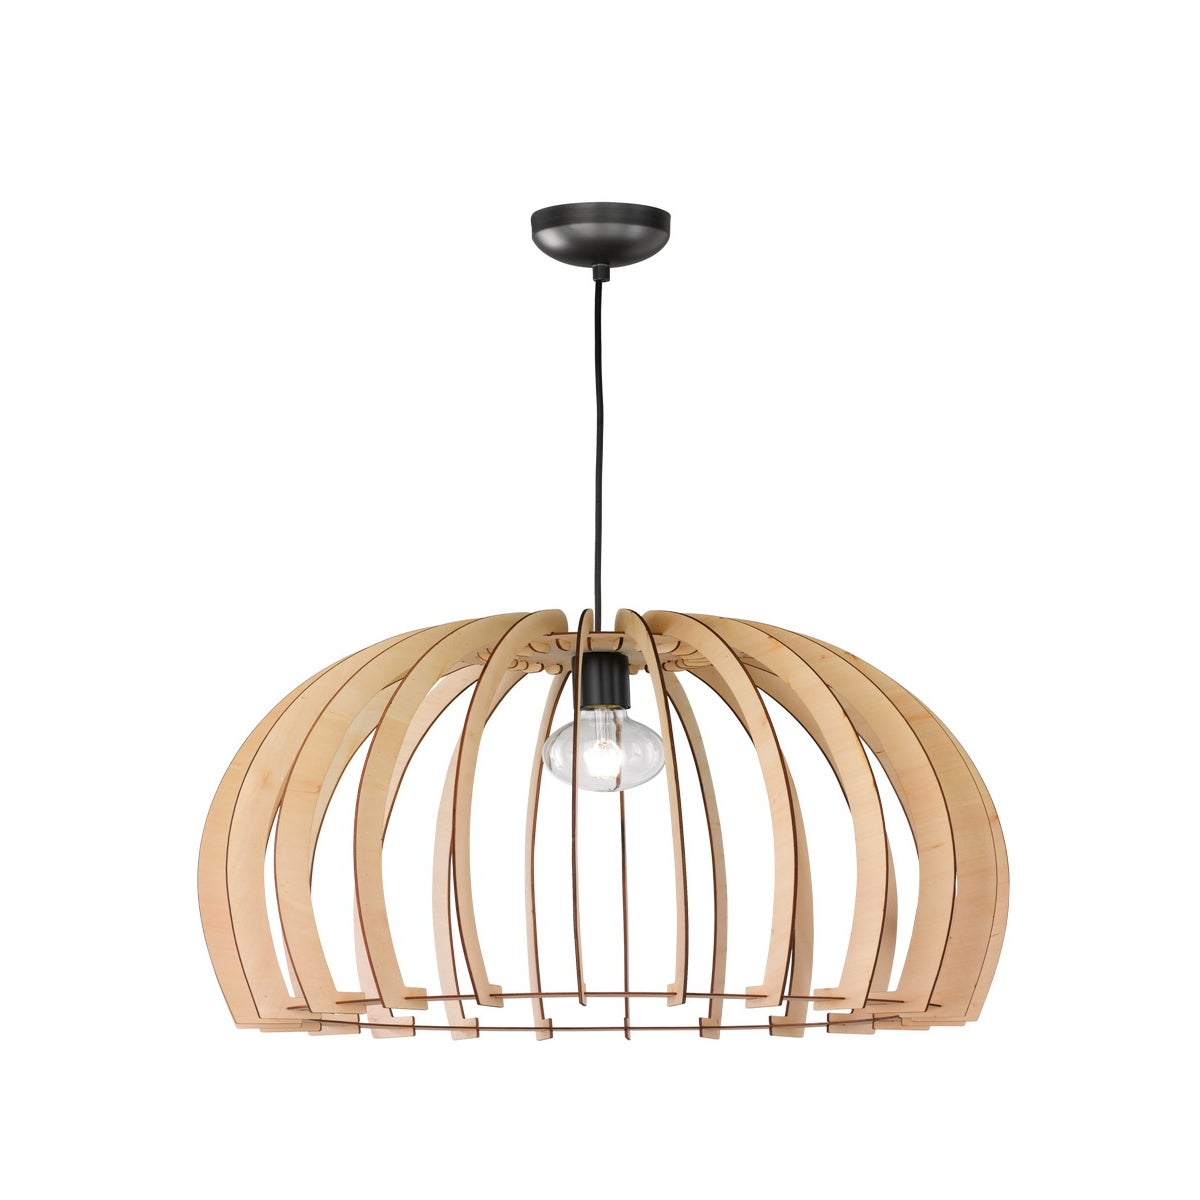 Wood Large Pendant with Dome Shade in Wood Color - deals | ArnsbergerLicht  Inc